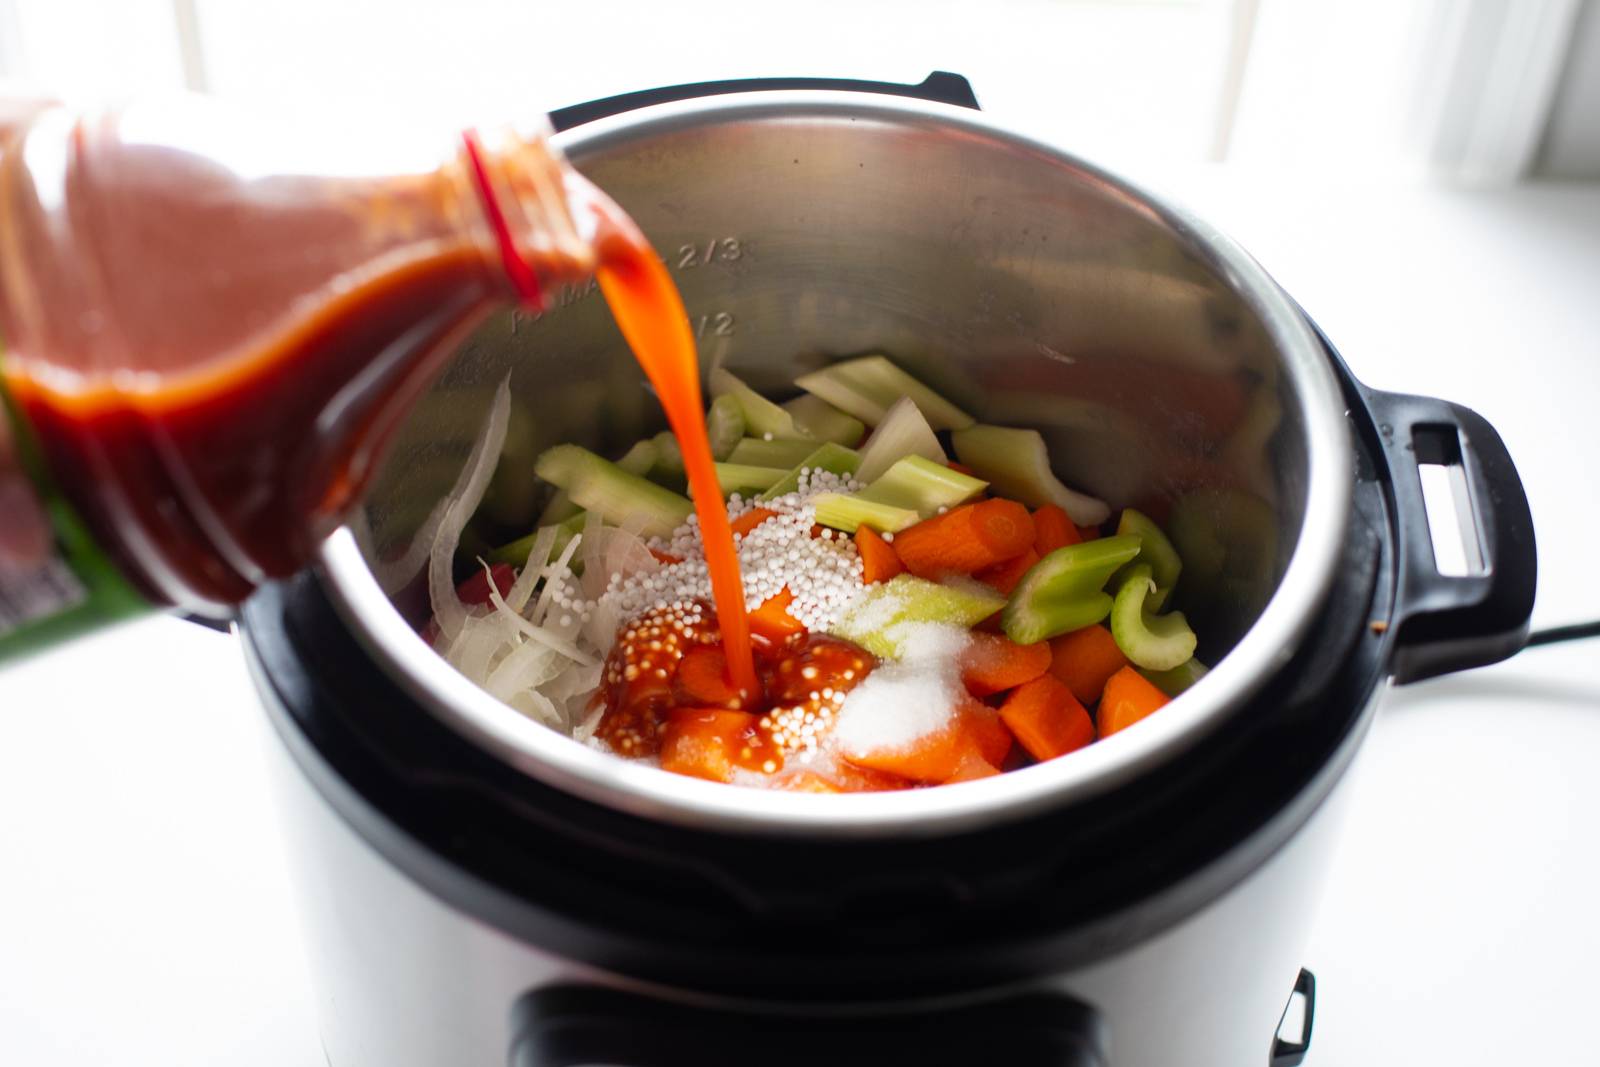 Instant Pot - Gone are days where a slow cooker was just a slow